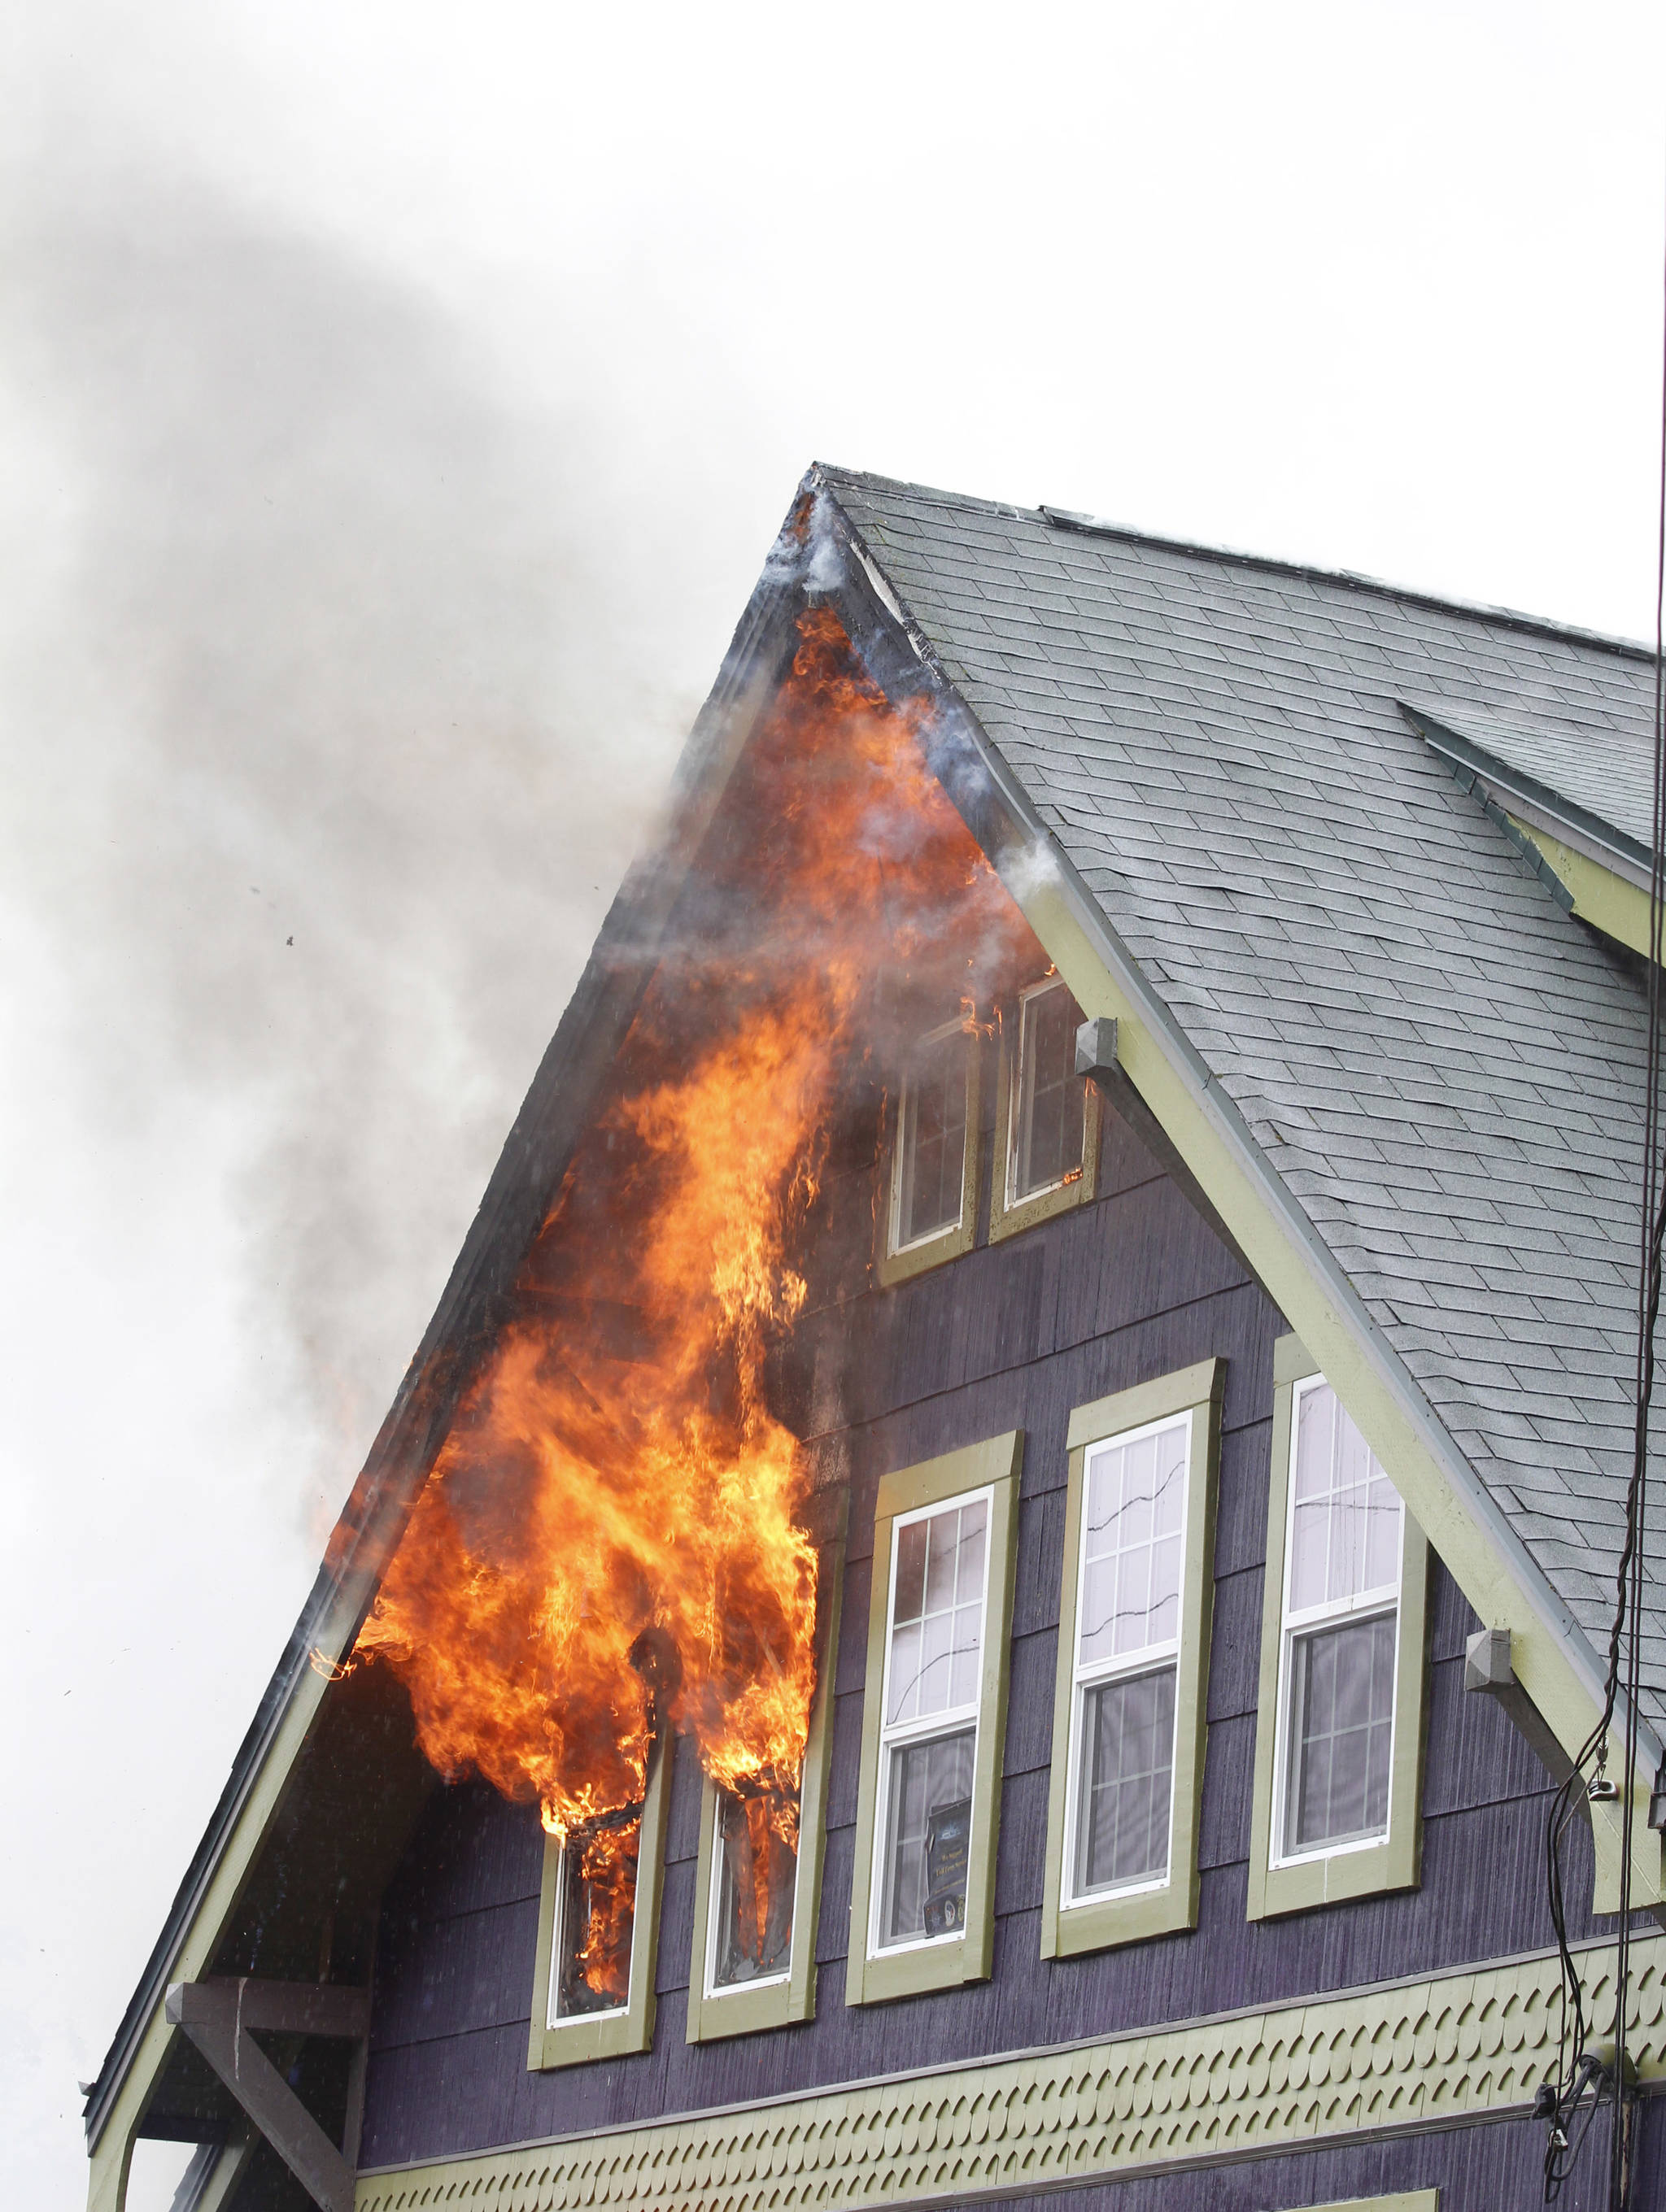 Flames come from windows on the third floor of a house at 505 N. Franklin Street on Monday. The two occupants of the house, along with their dog, escaped unharmed. (Alex McCarthy | Juneau Empire)